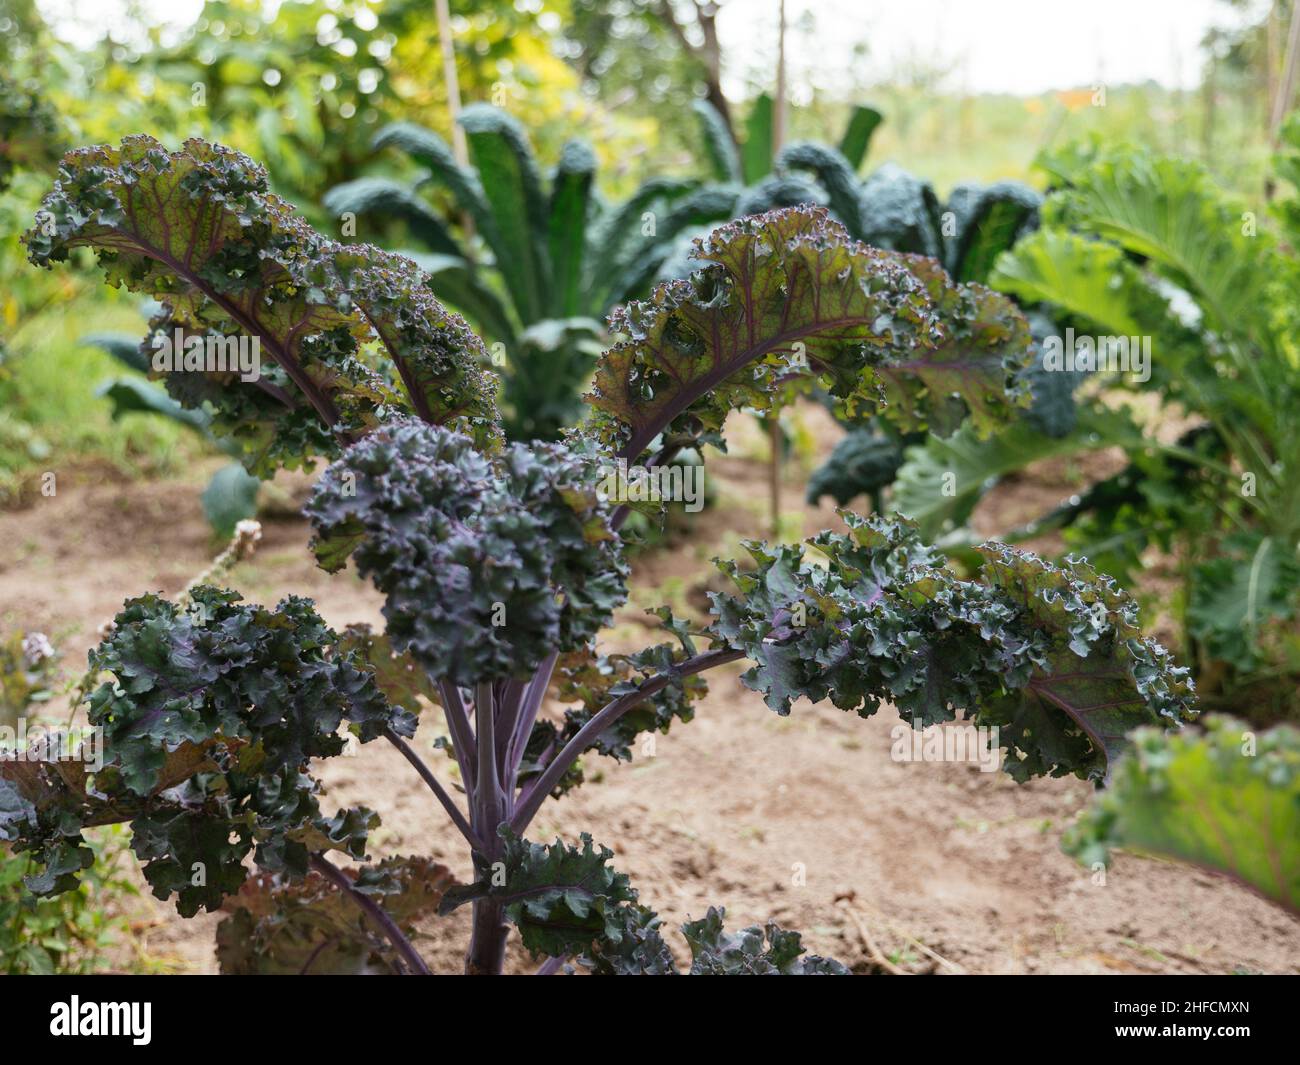 Red kale variety 'Roter Krauser' with large coarsely feathered leaves. Stock Photo